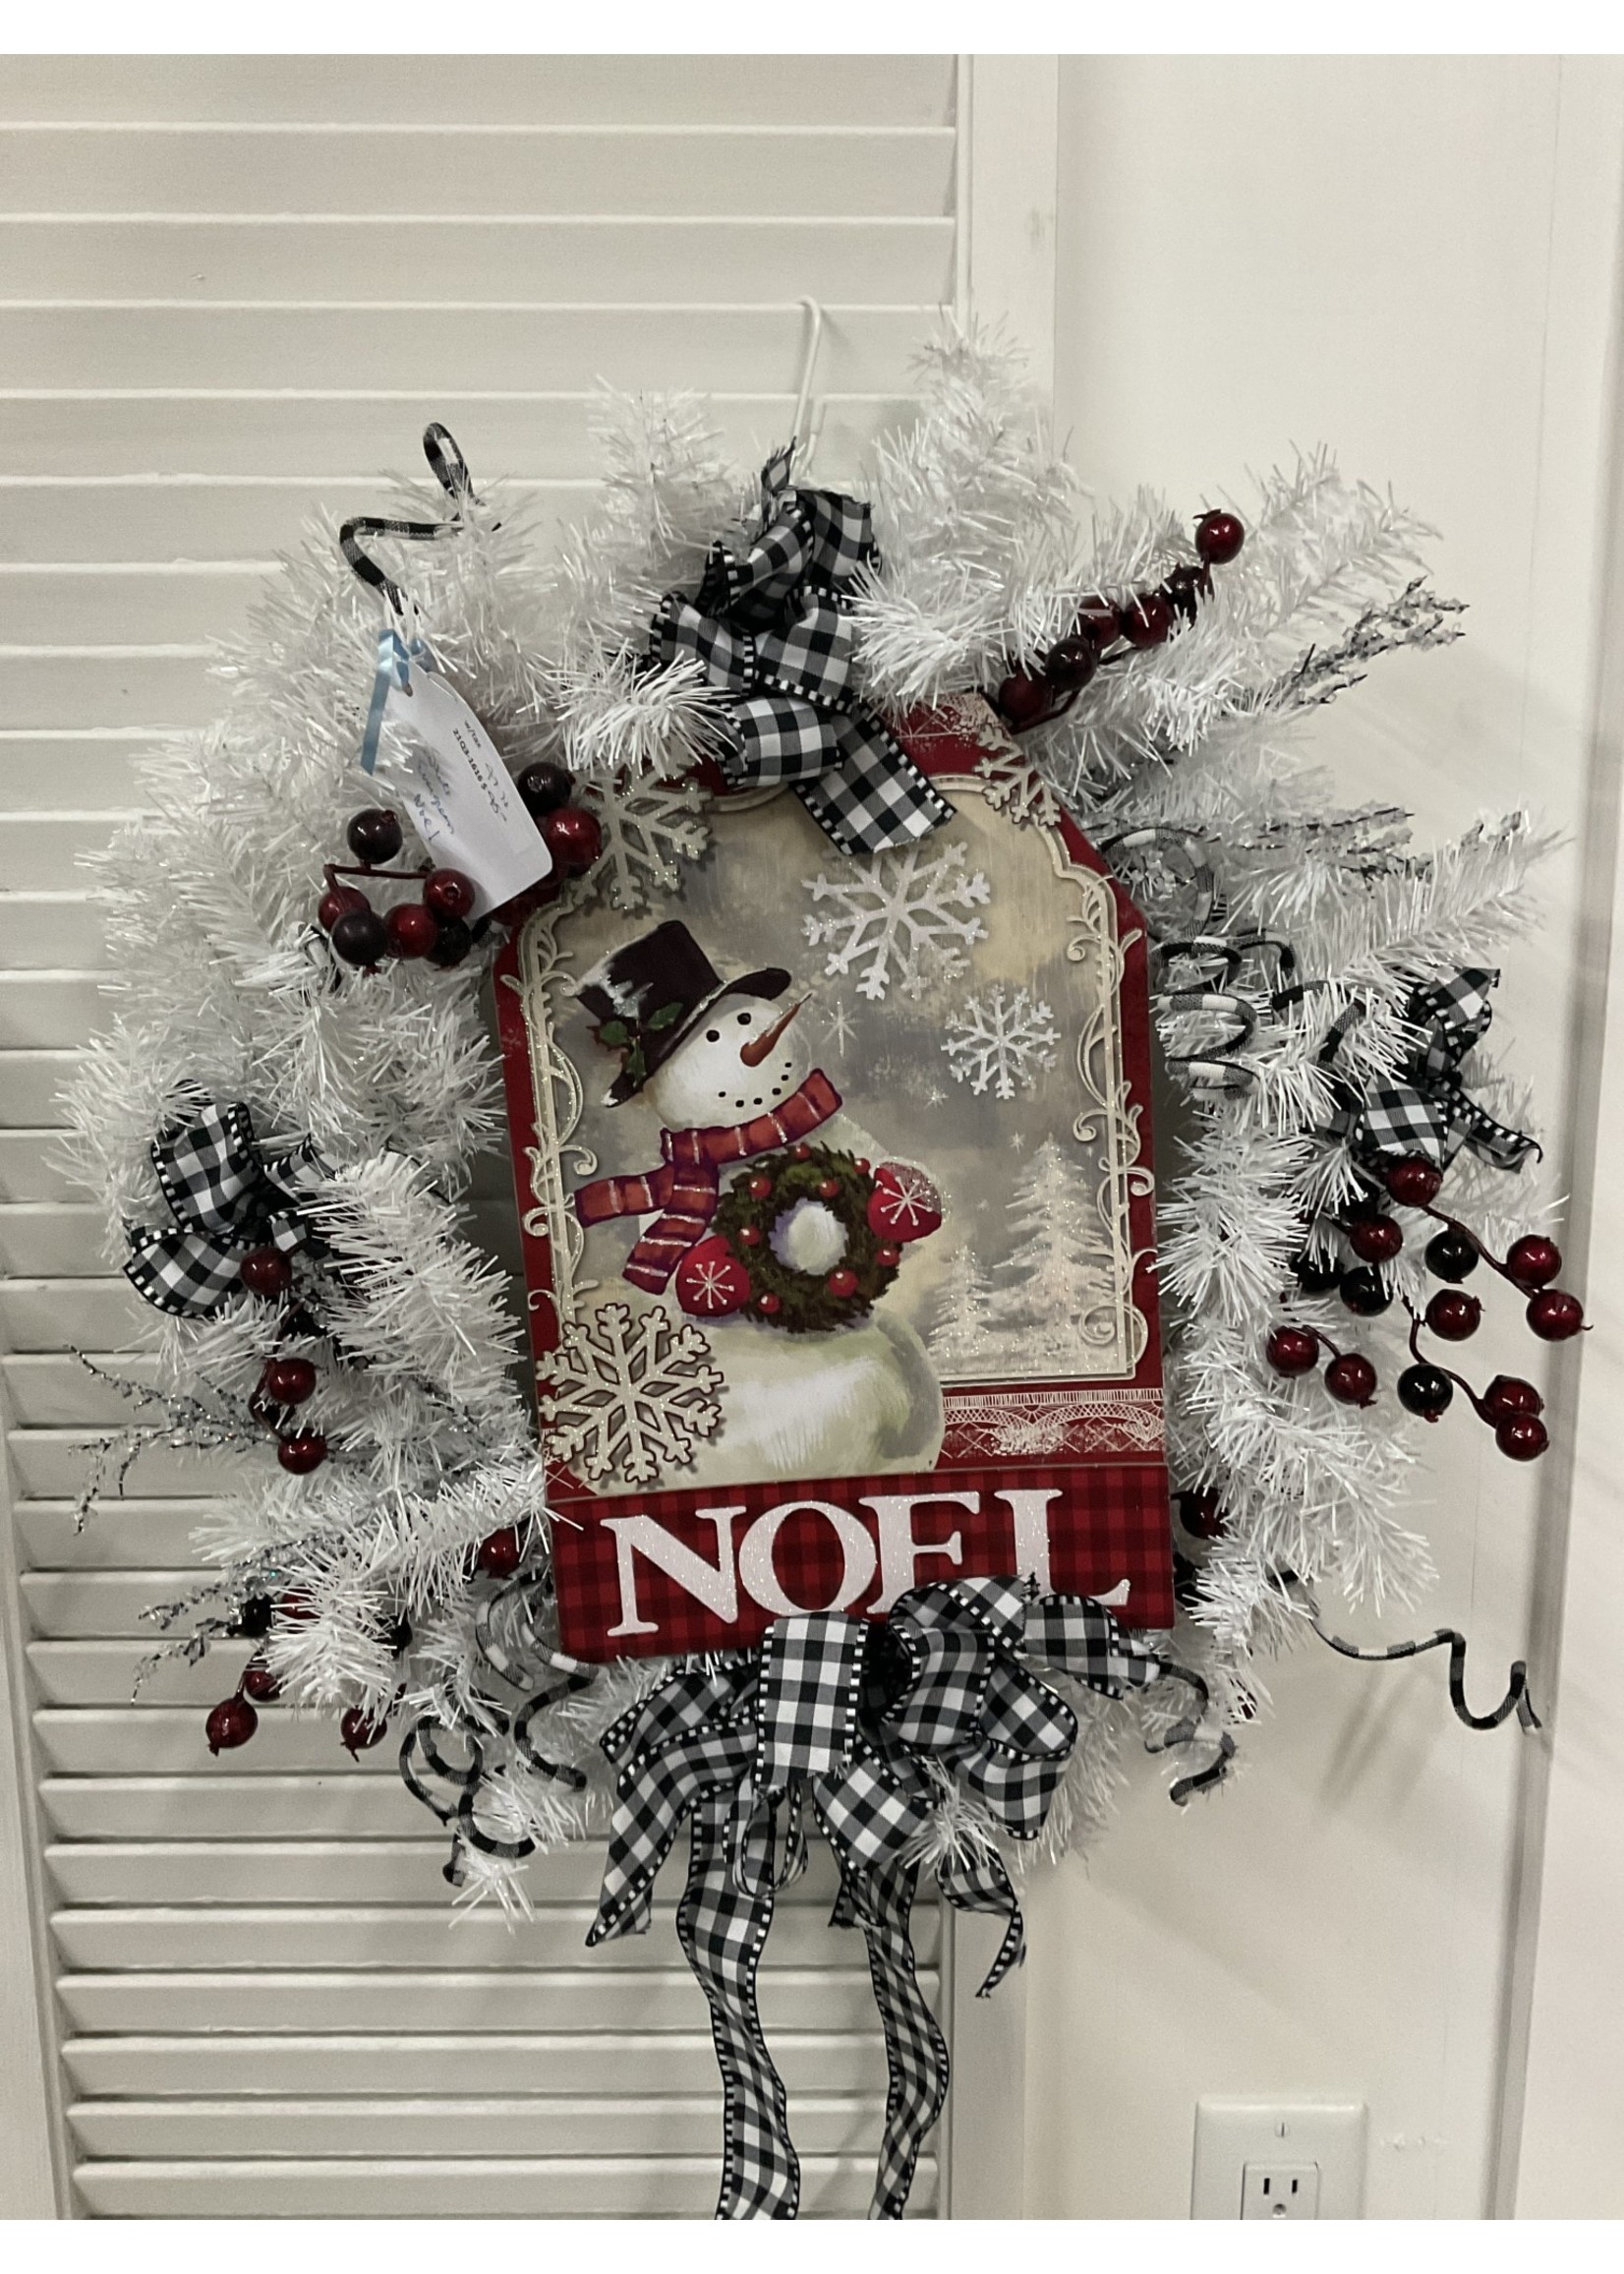 My New Favorite Thing Wreath Evergreen White "Noel" with Snowman and Black Check Ribbon 22 inches